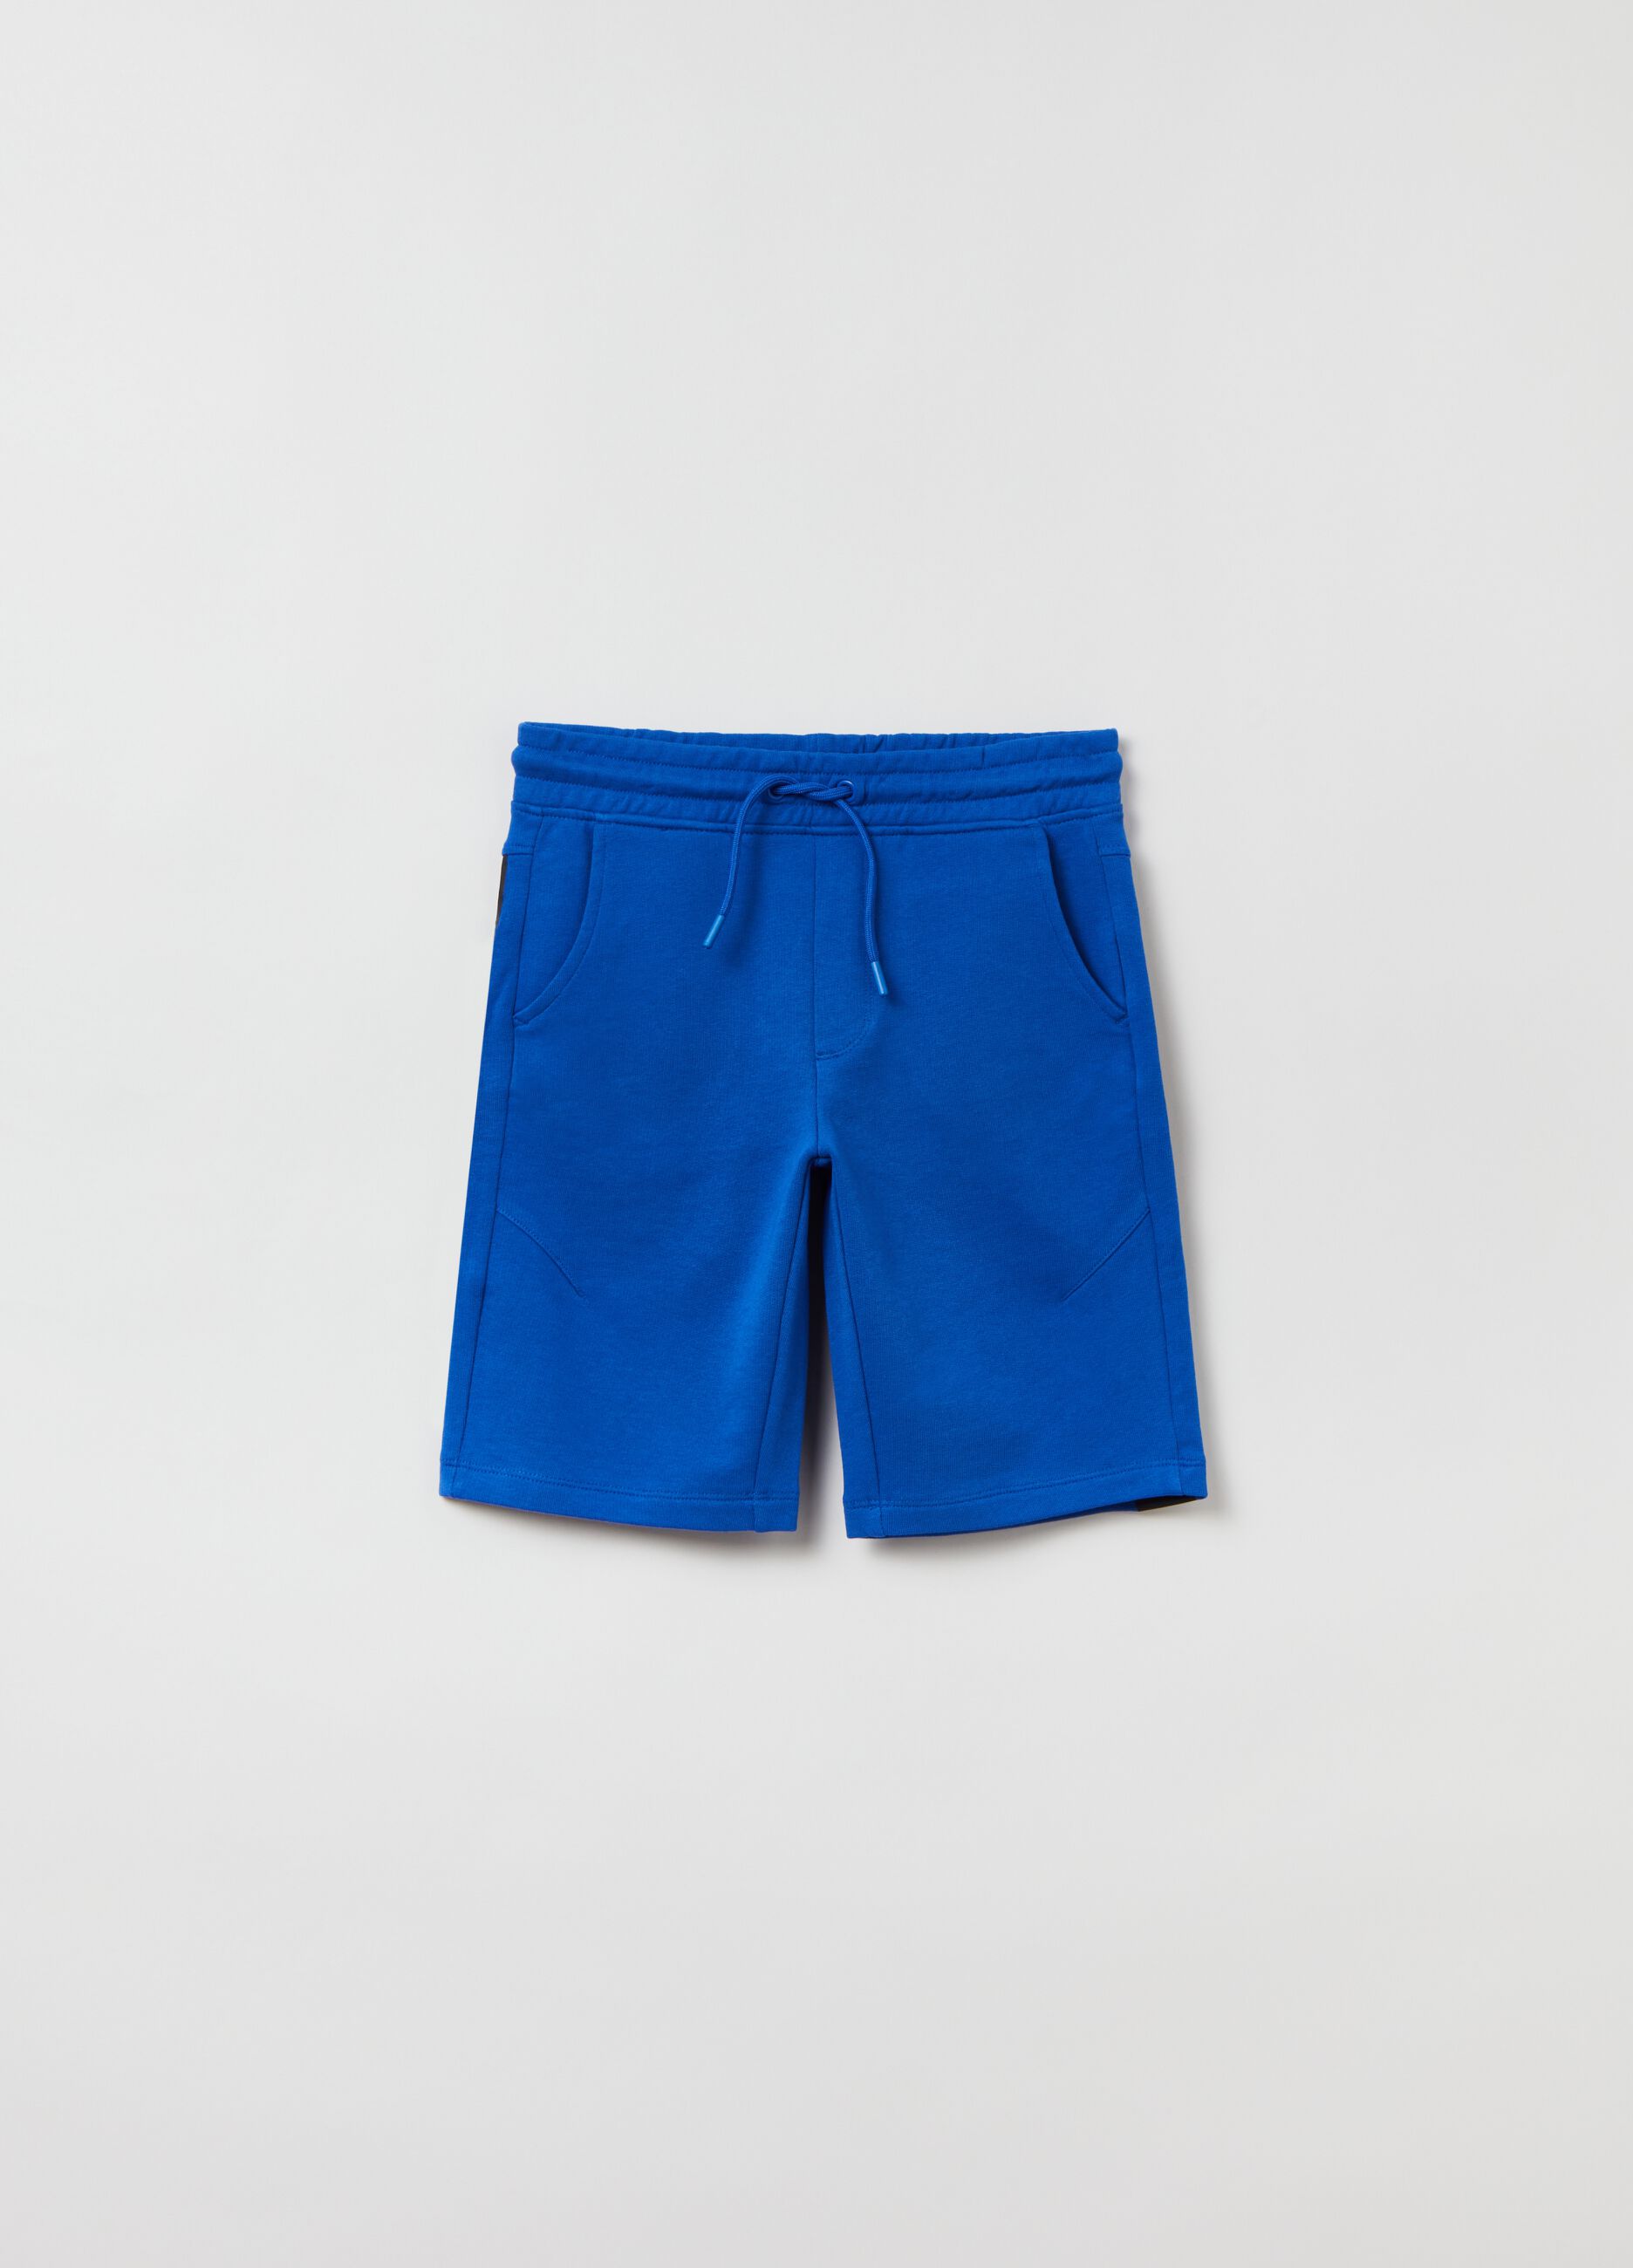 Bermuda shorts with drawstring waist and side bands.